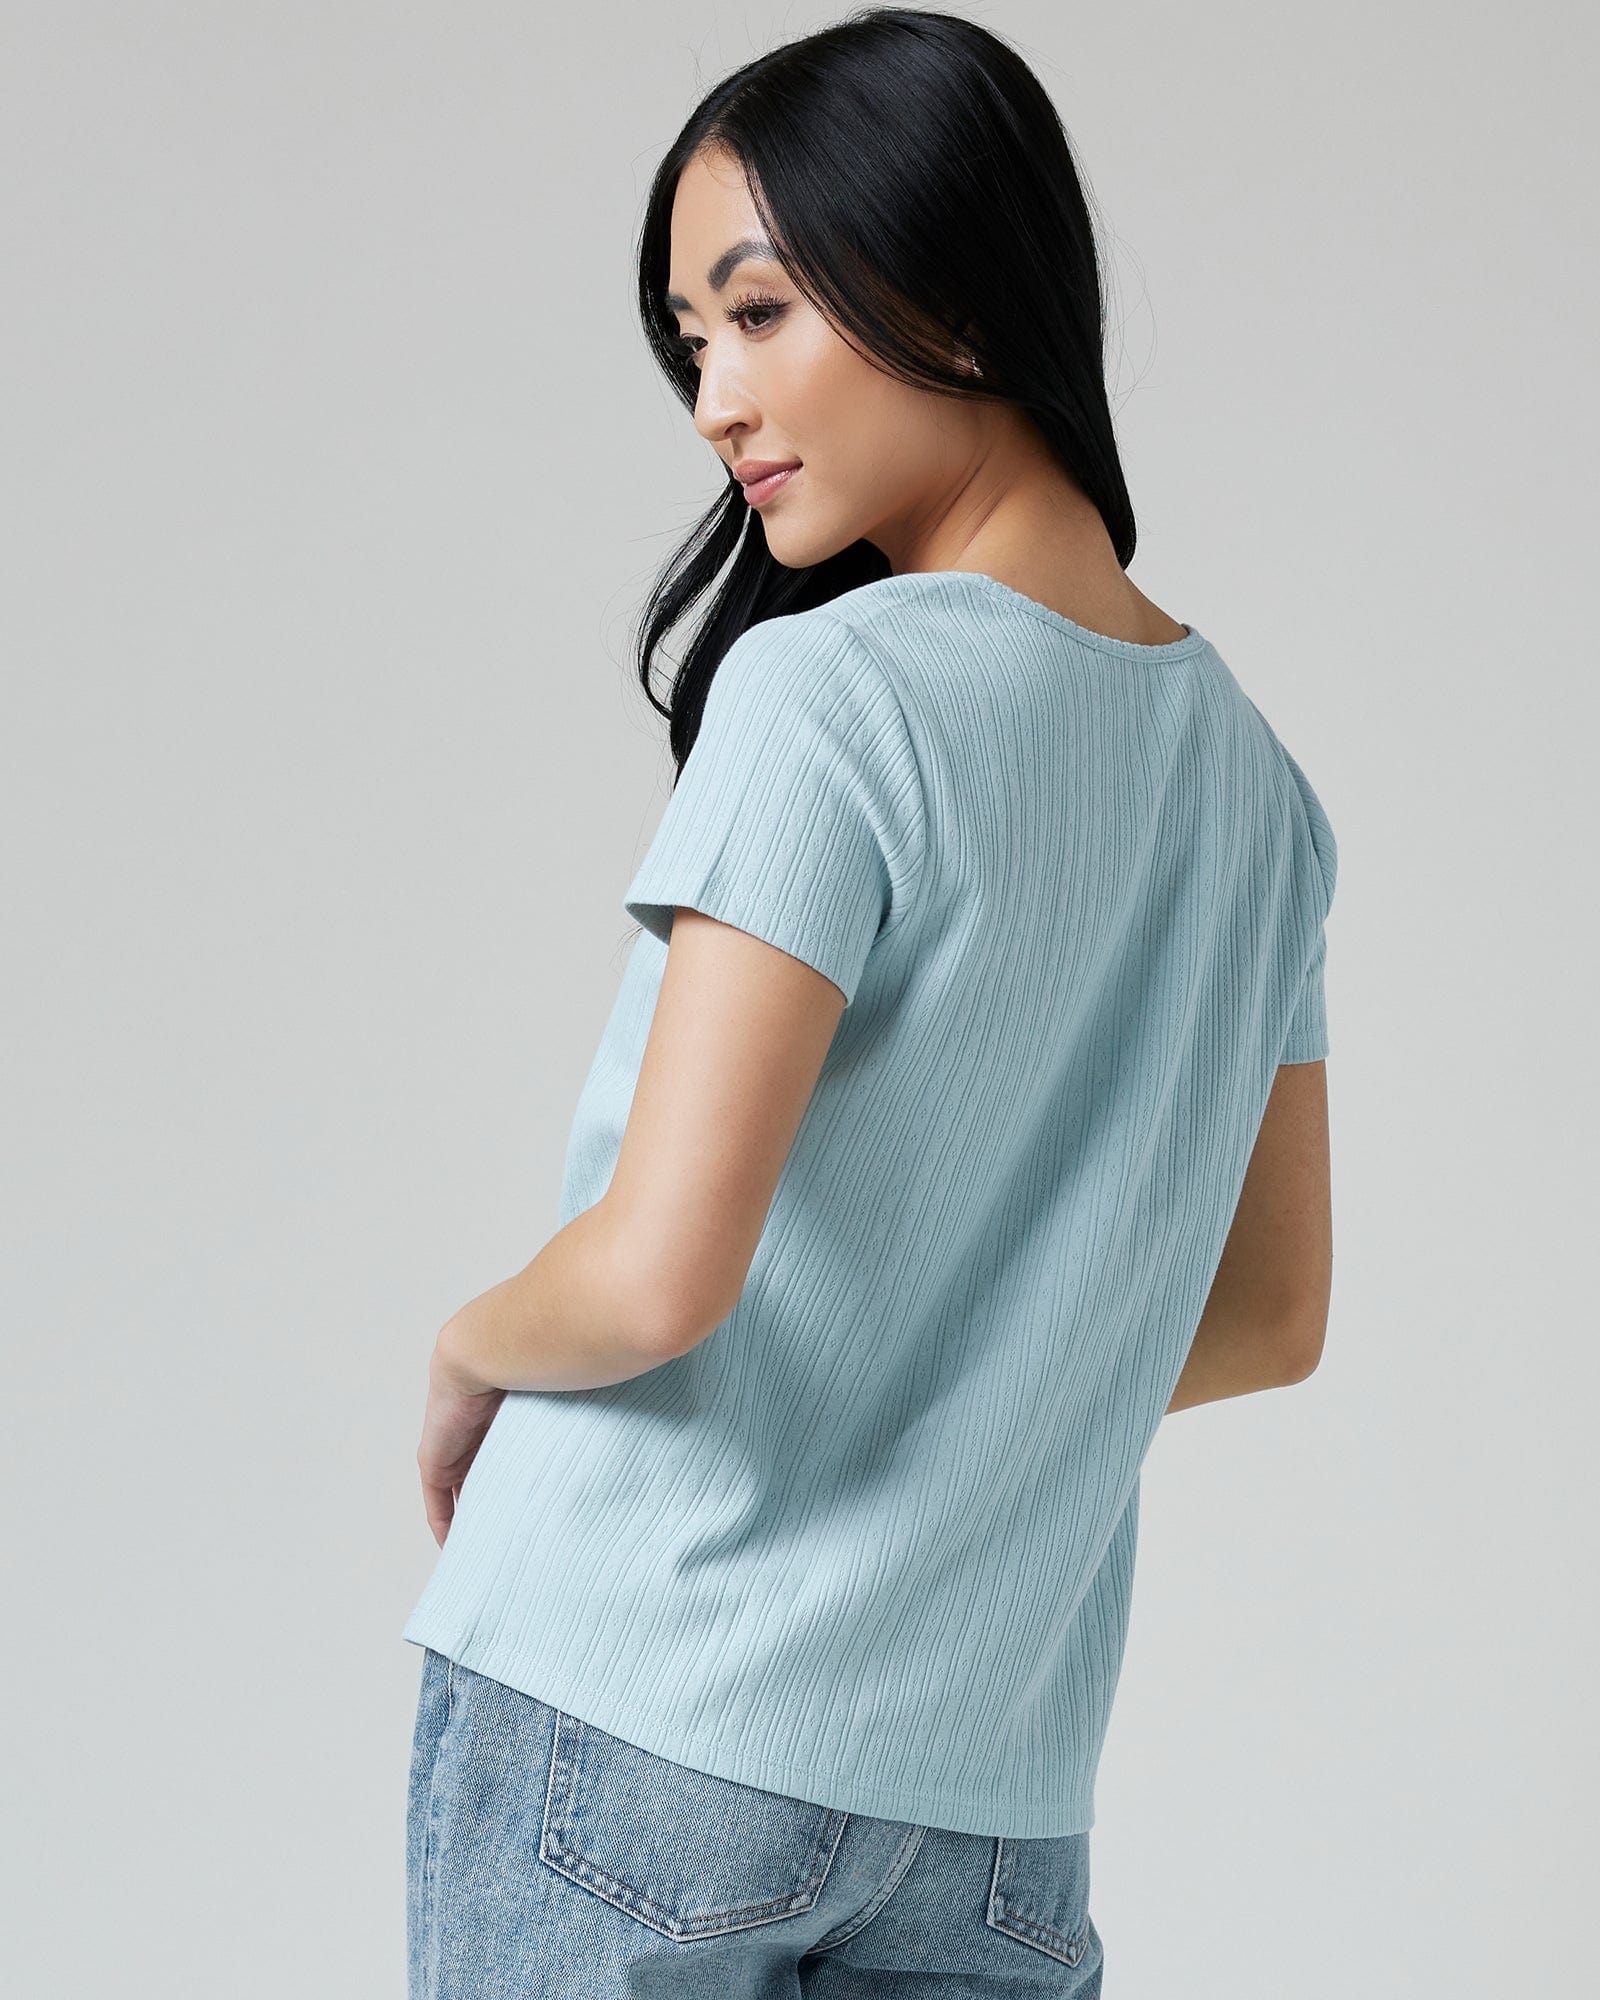 Woman in a blue short sleeved v-neck tee